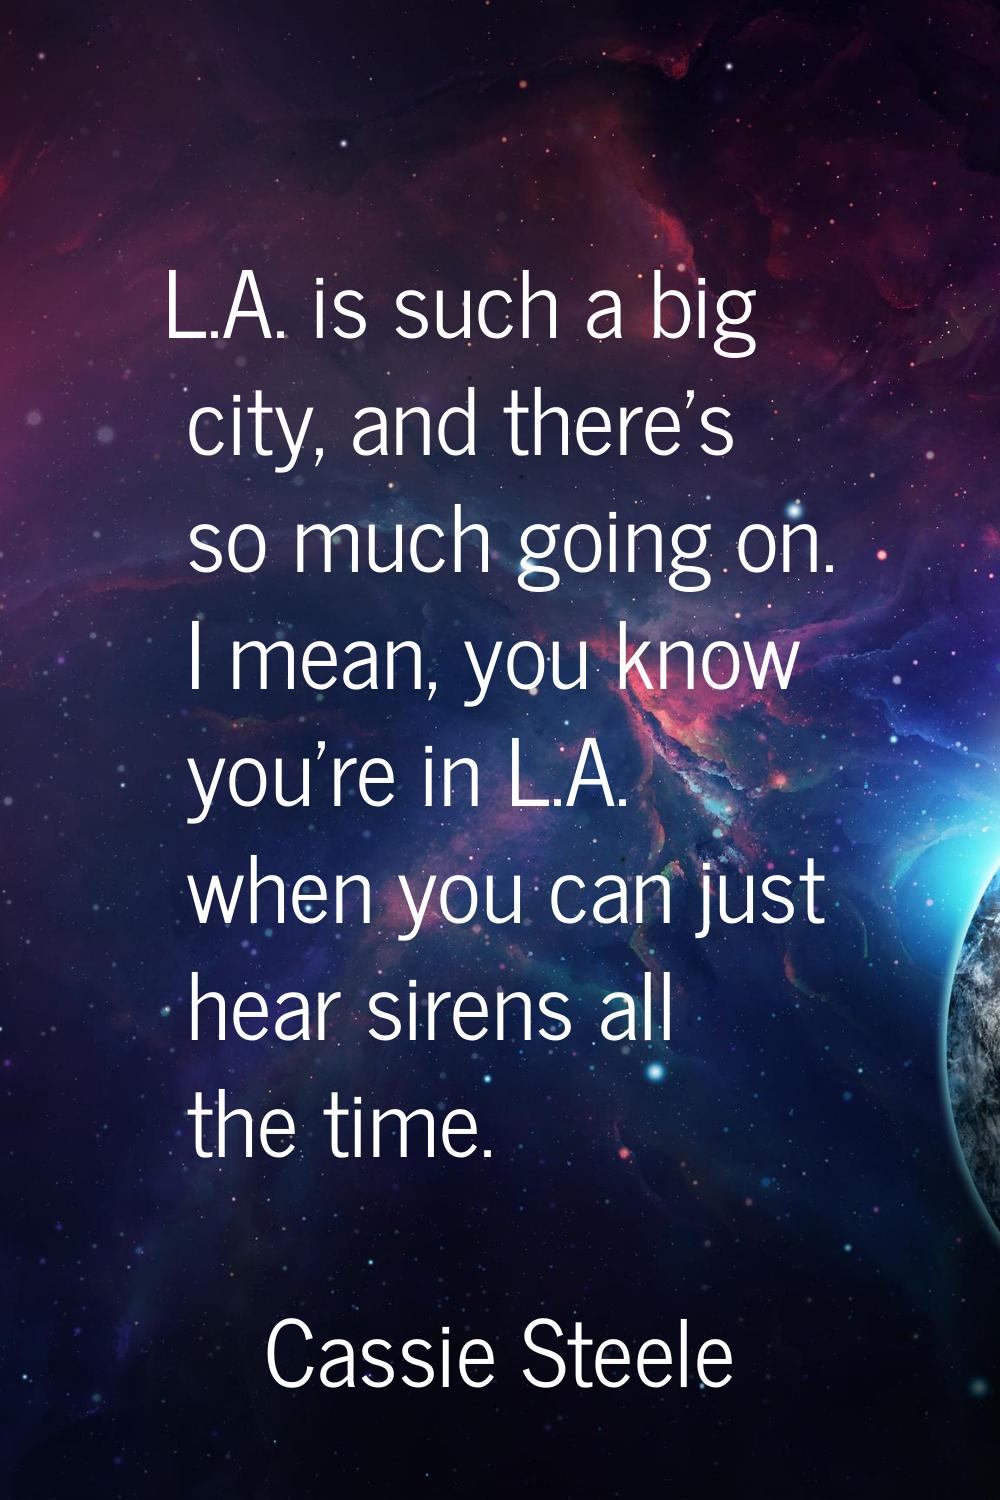 L.A. is such a big city, and there's so much going on. I mean, you know you're in L.A. when you can